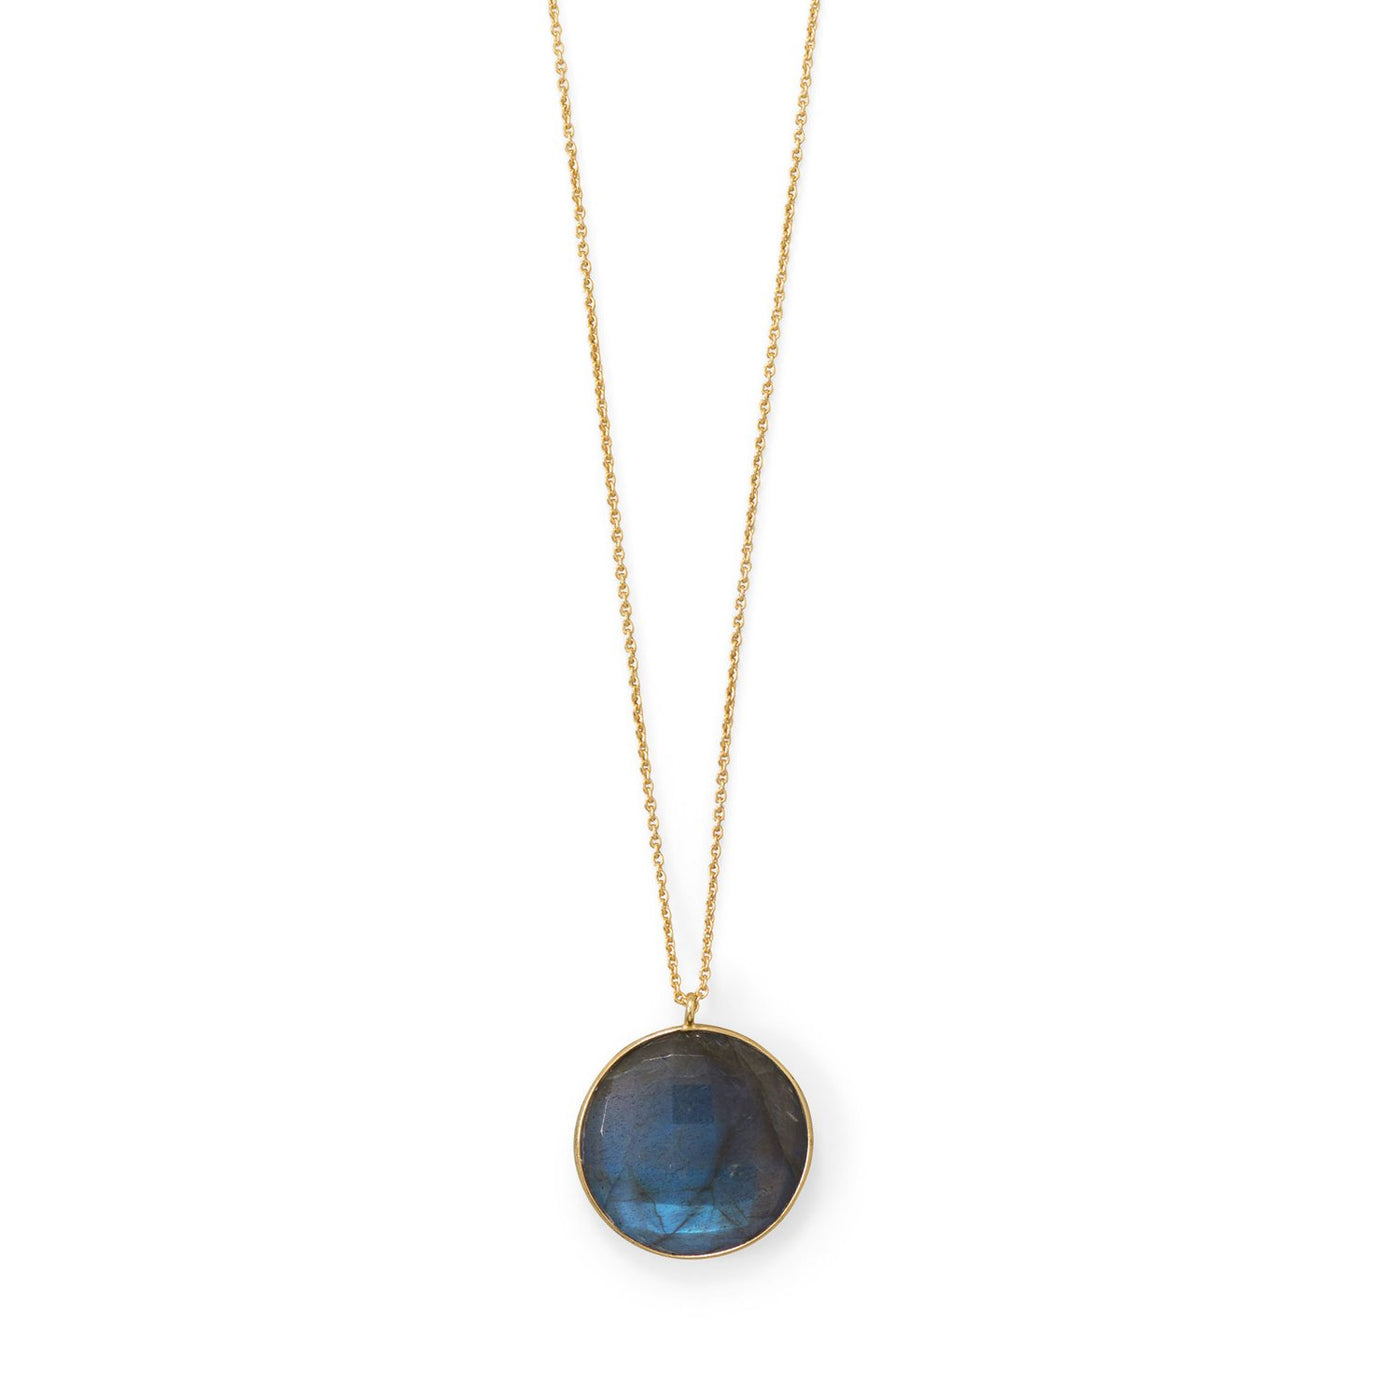 Exciting, Electric and Eye Catching. Round Labradorite Necklace - 14 Karat Gold Plated 